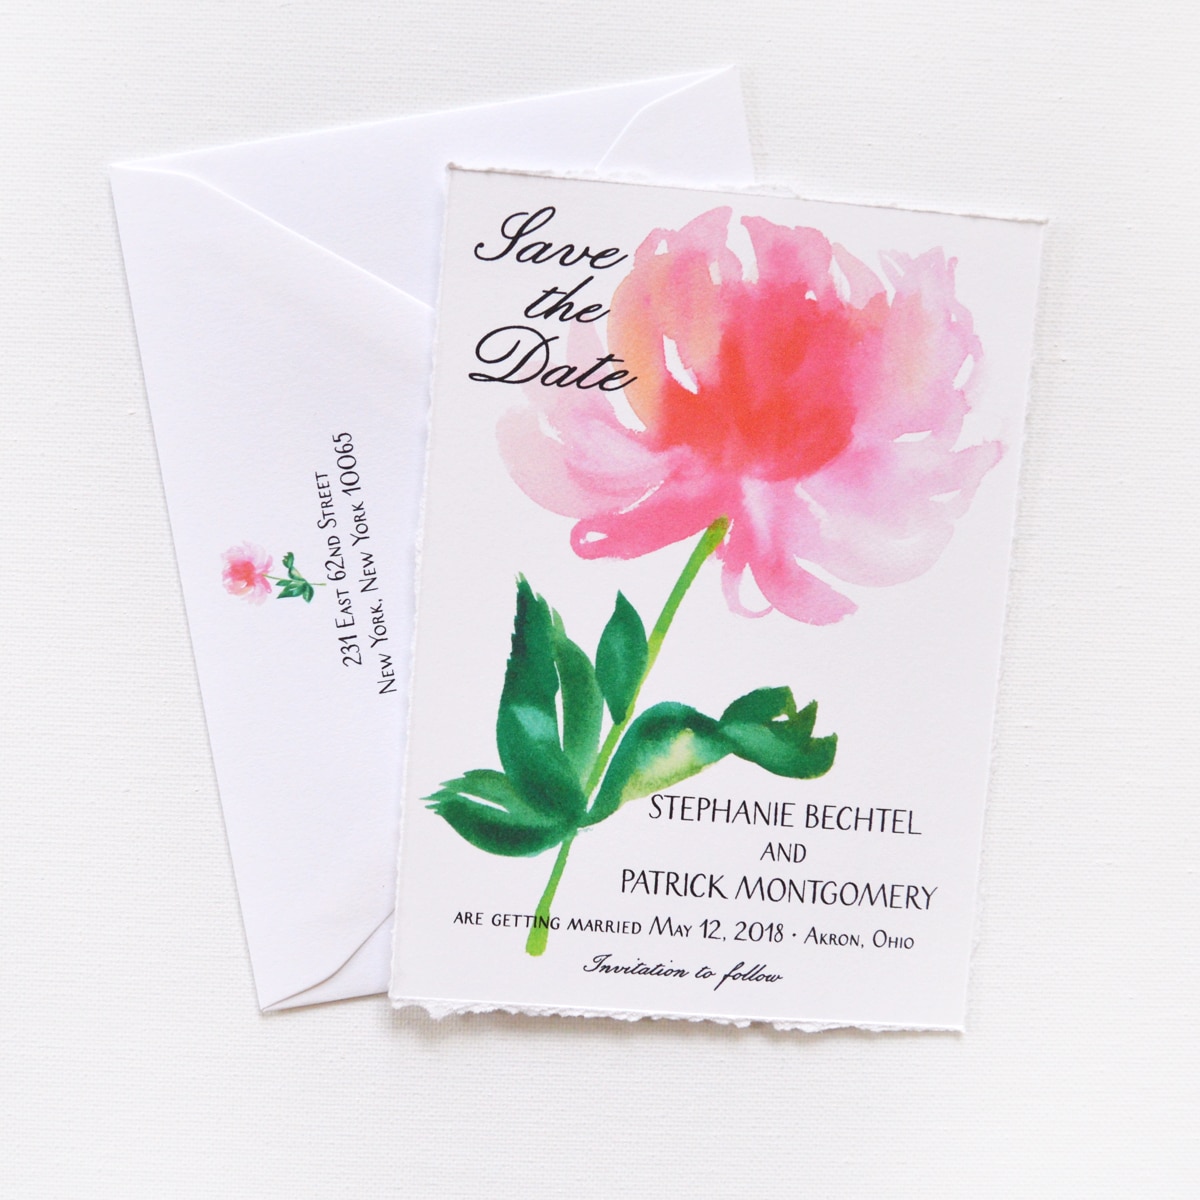 Custom save the dates with watercolor pink peony by artist Michelle Mospens. www.mospensstudio.com